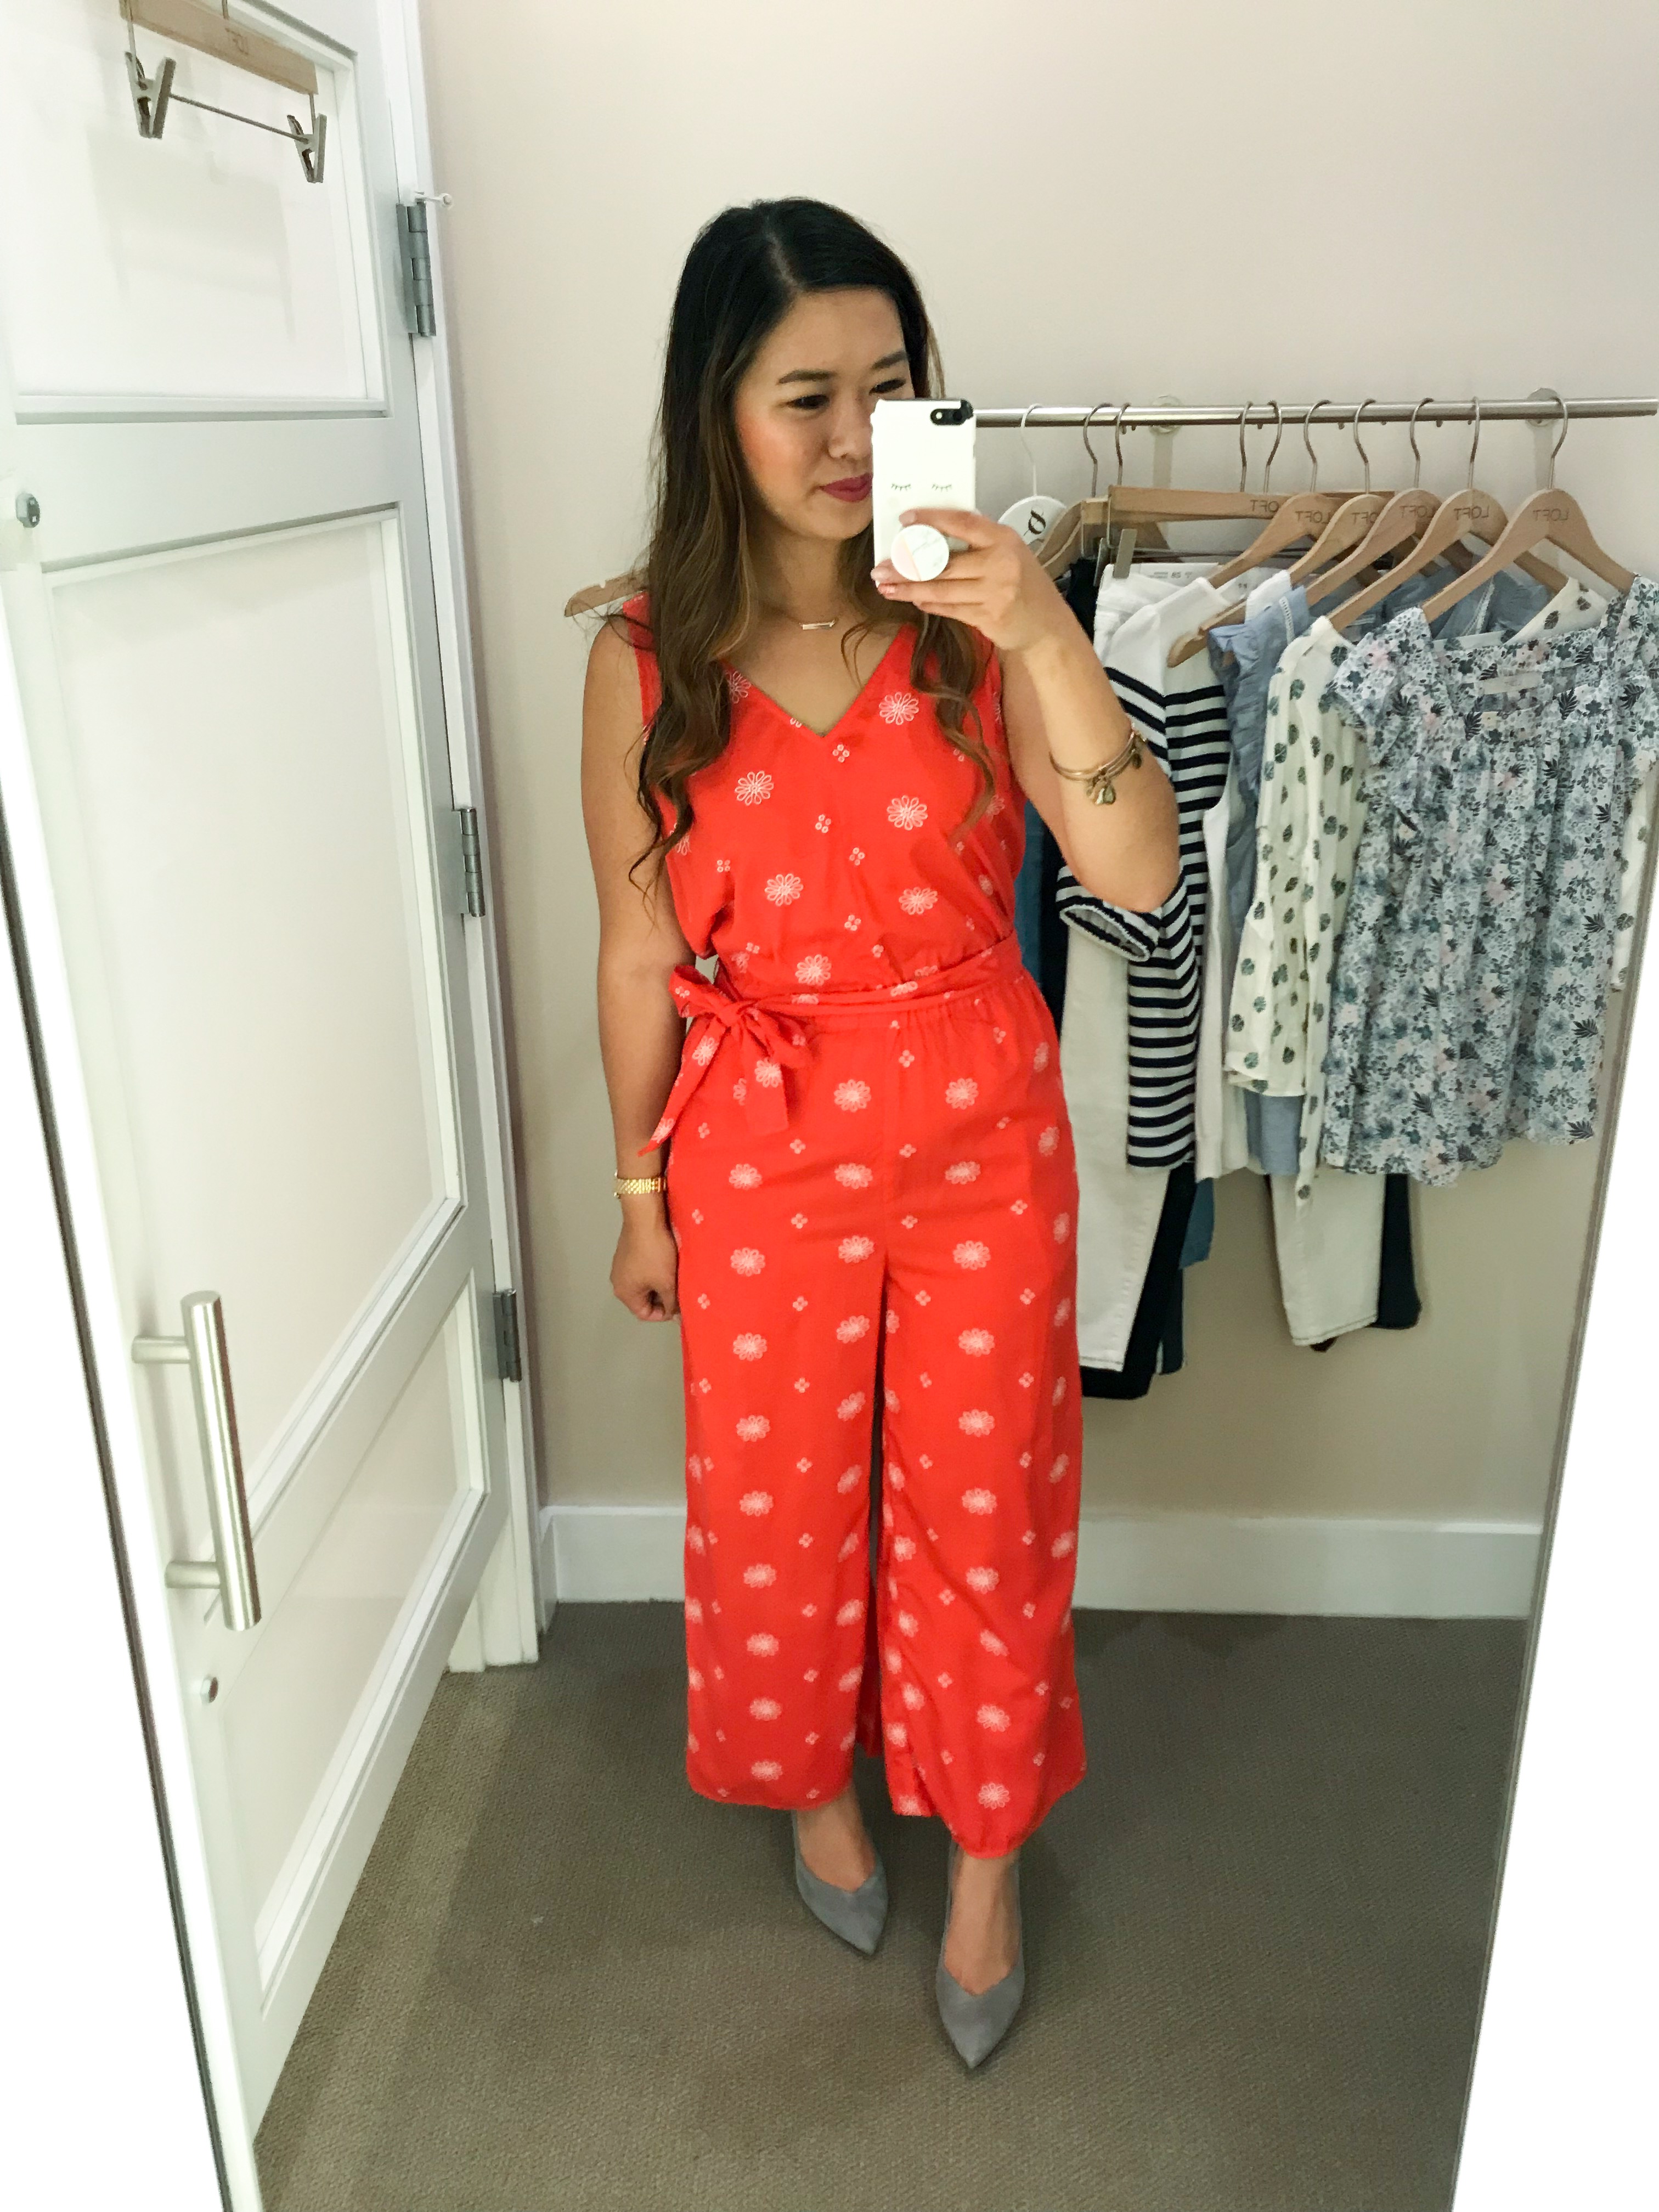 LOFT Dressing Room Diaries - July 2018 + A Special Guest